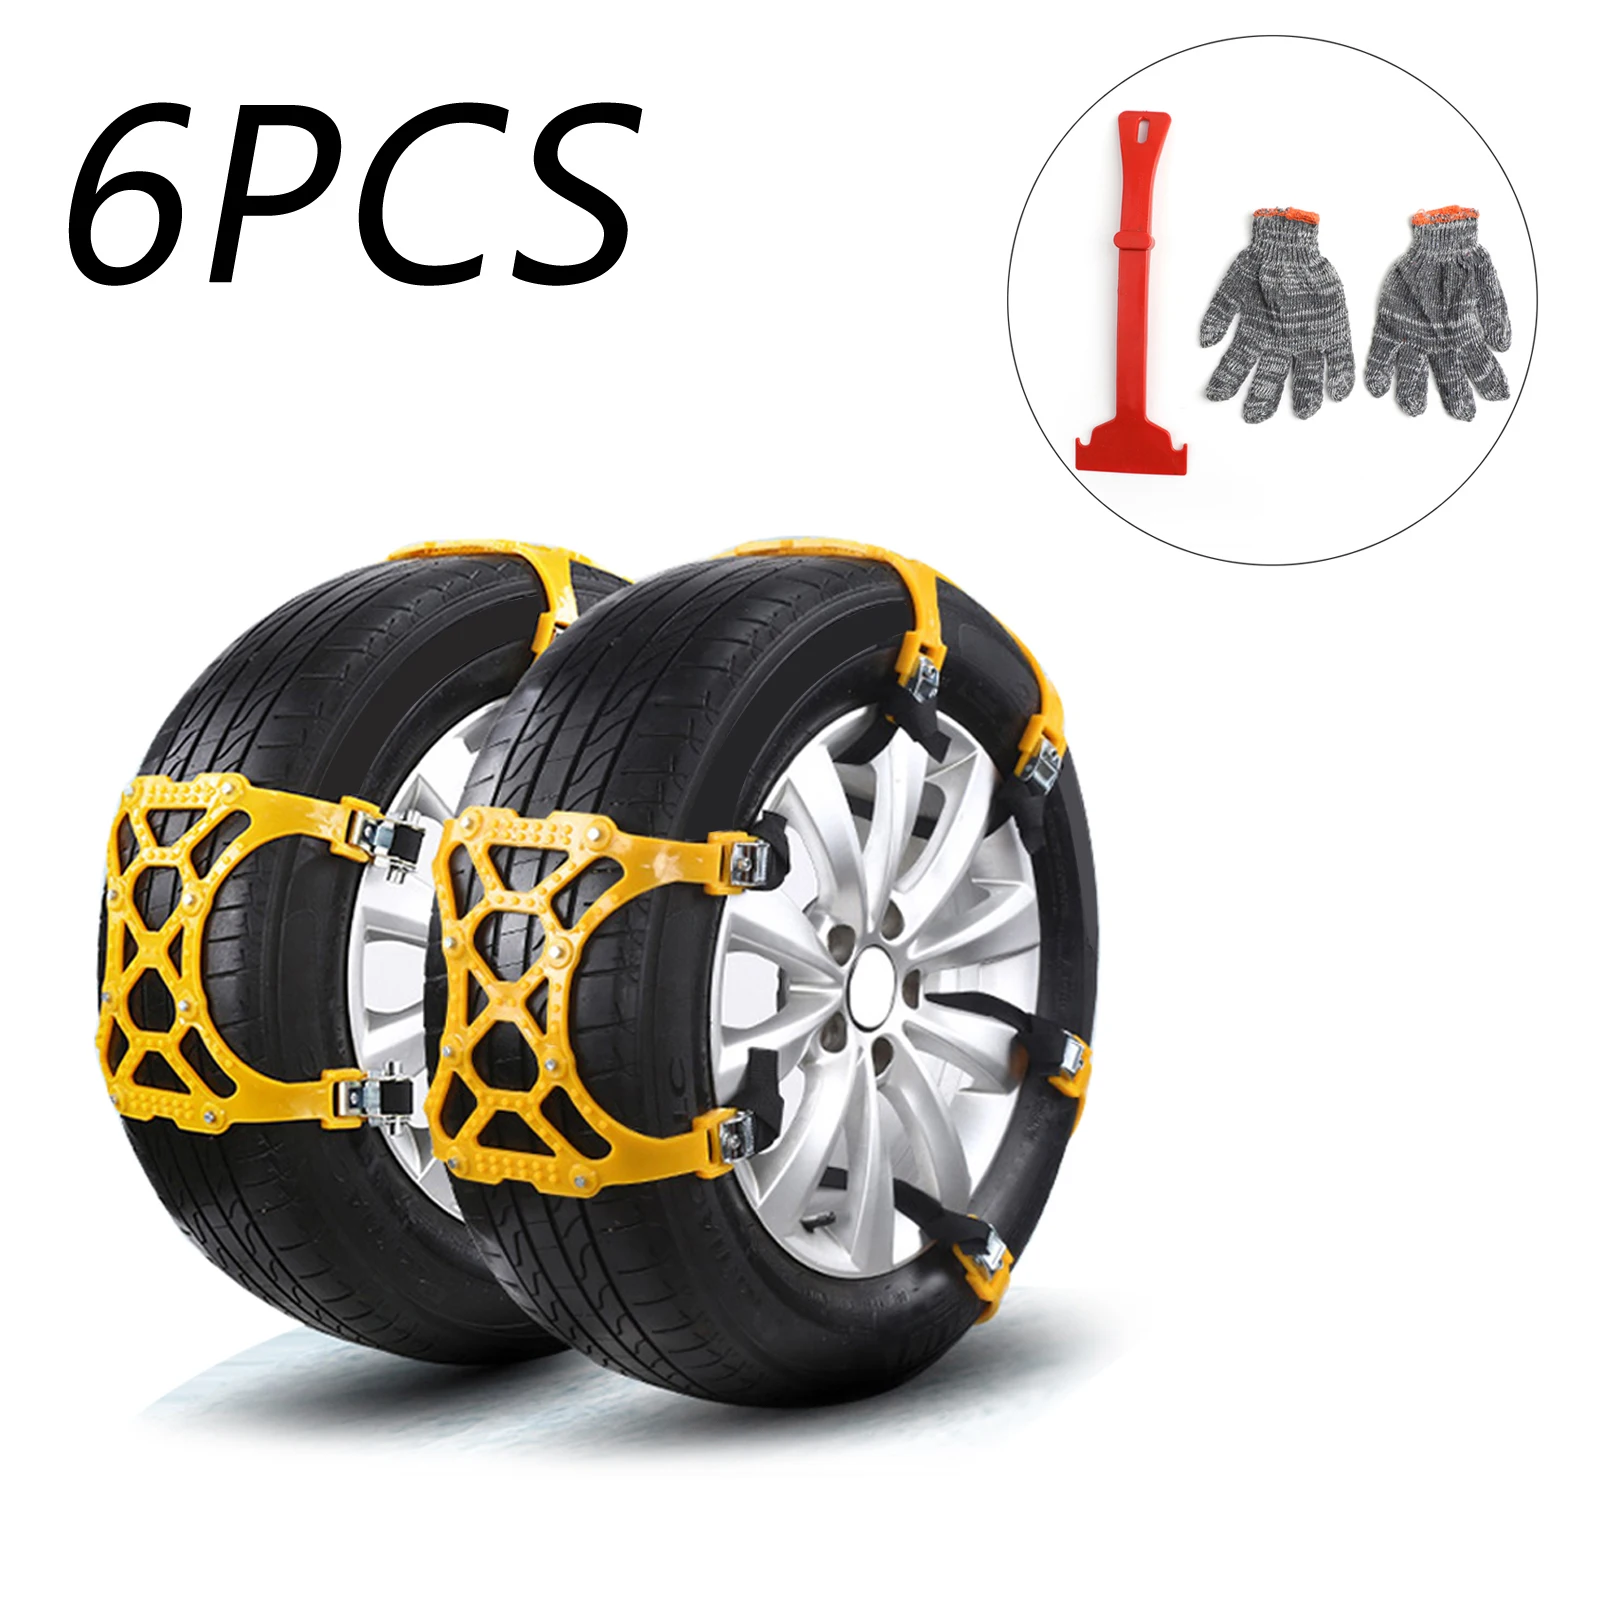 

Areyourshop 6PCS Tire Chains Snow Anti-skid Thick Tendon Emergency Thickening of Car SUV Universal For All Models Auto Parts